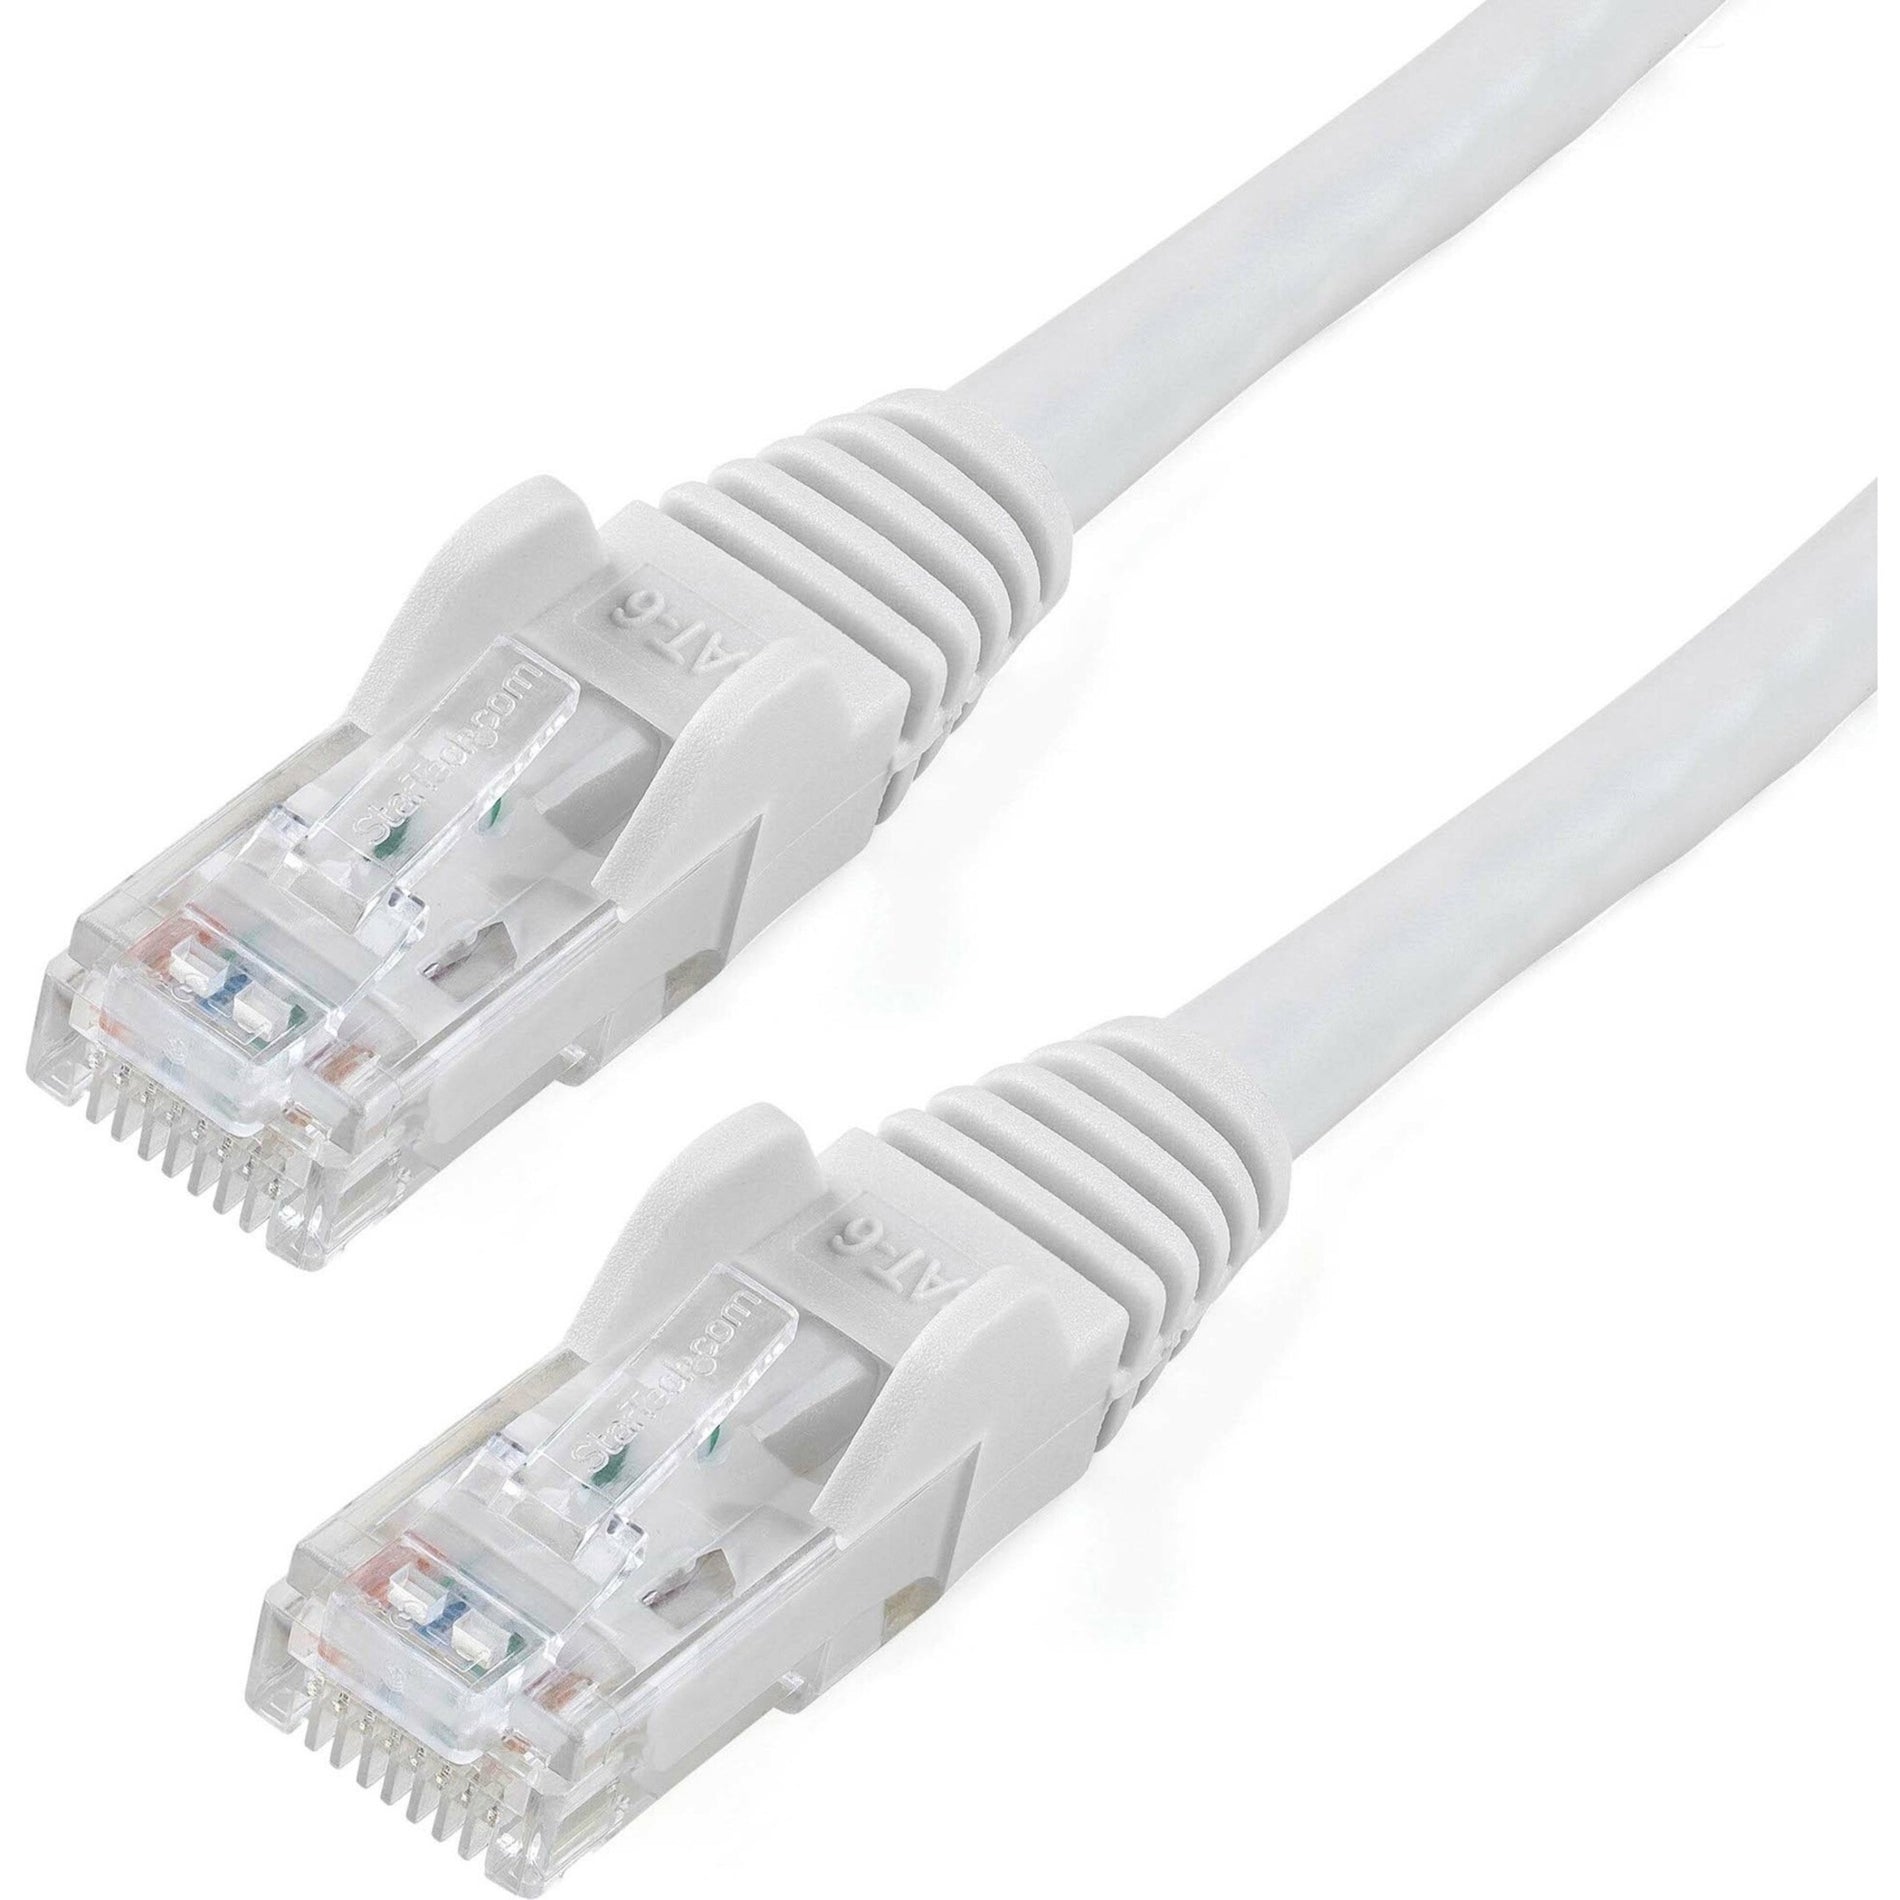 StarTech.com N6PATCH30WH Cat6 Patch Cable, 30ft White Ethernet Cable, Snagless RJ45 Connectors